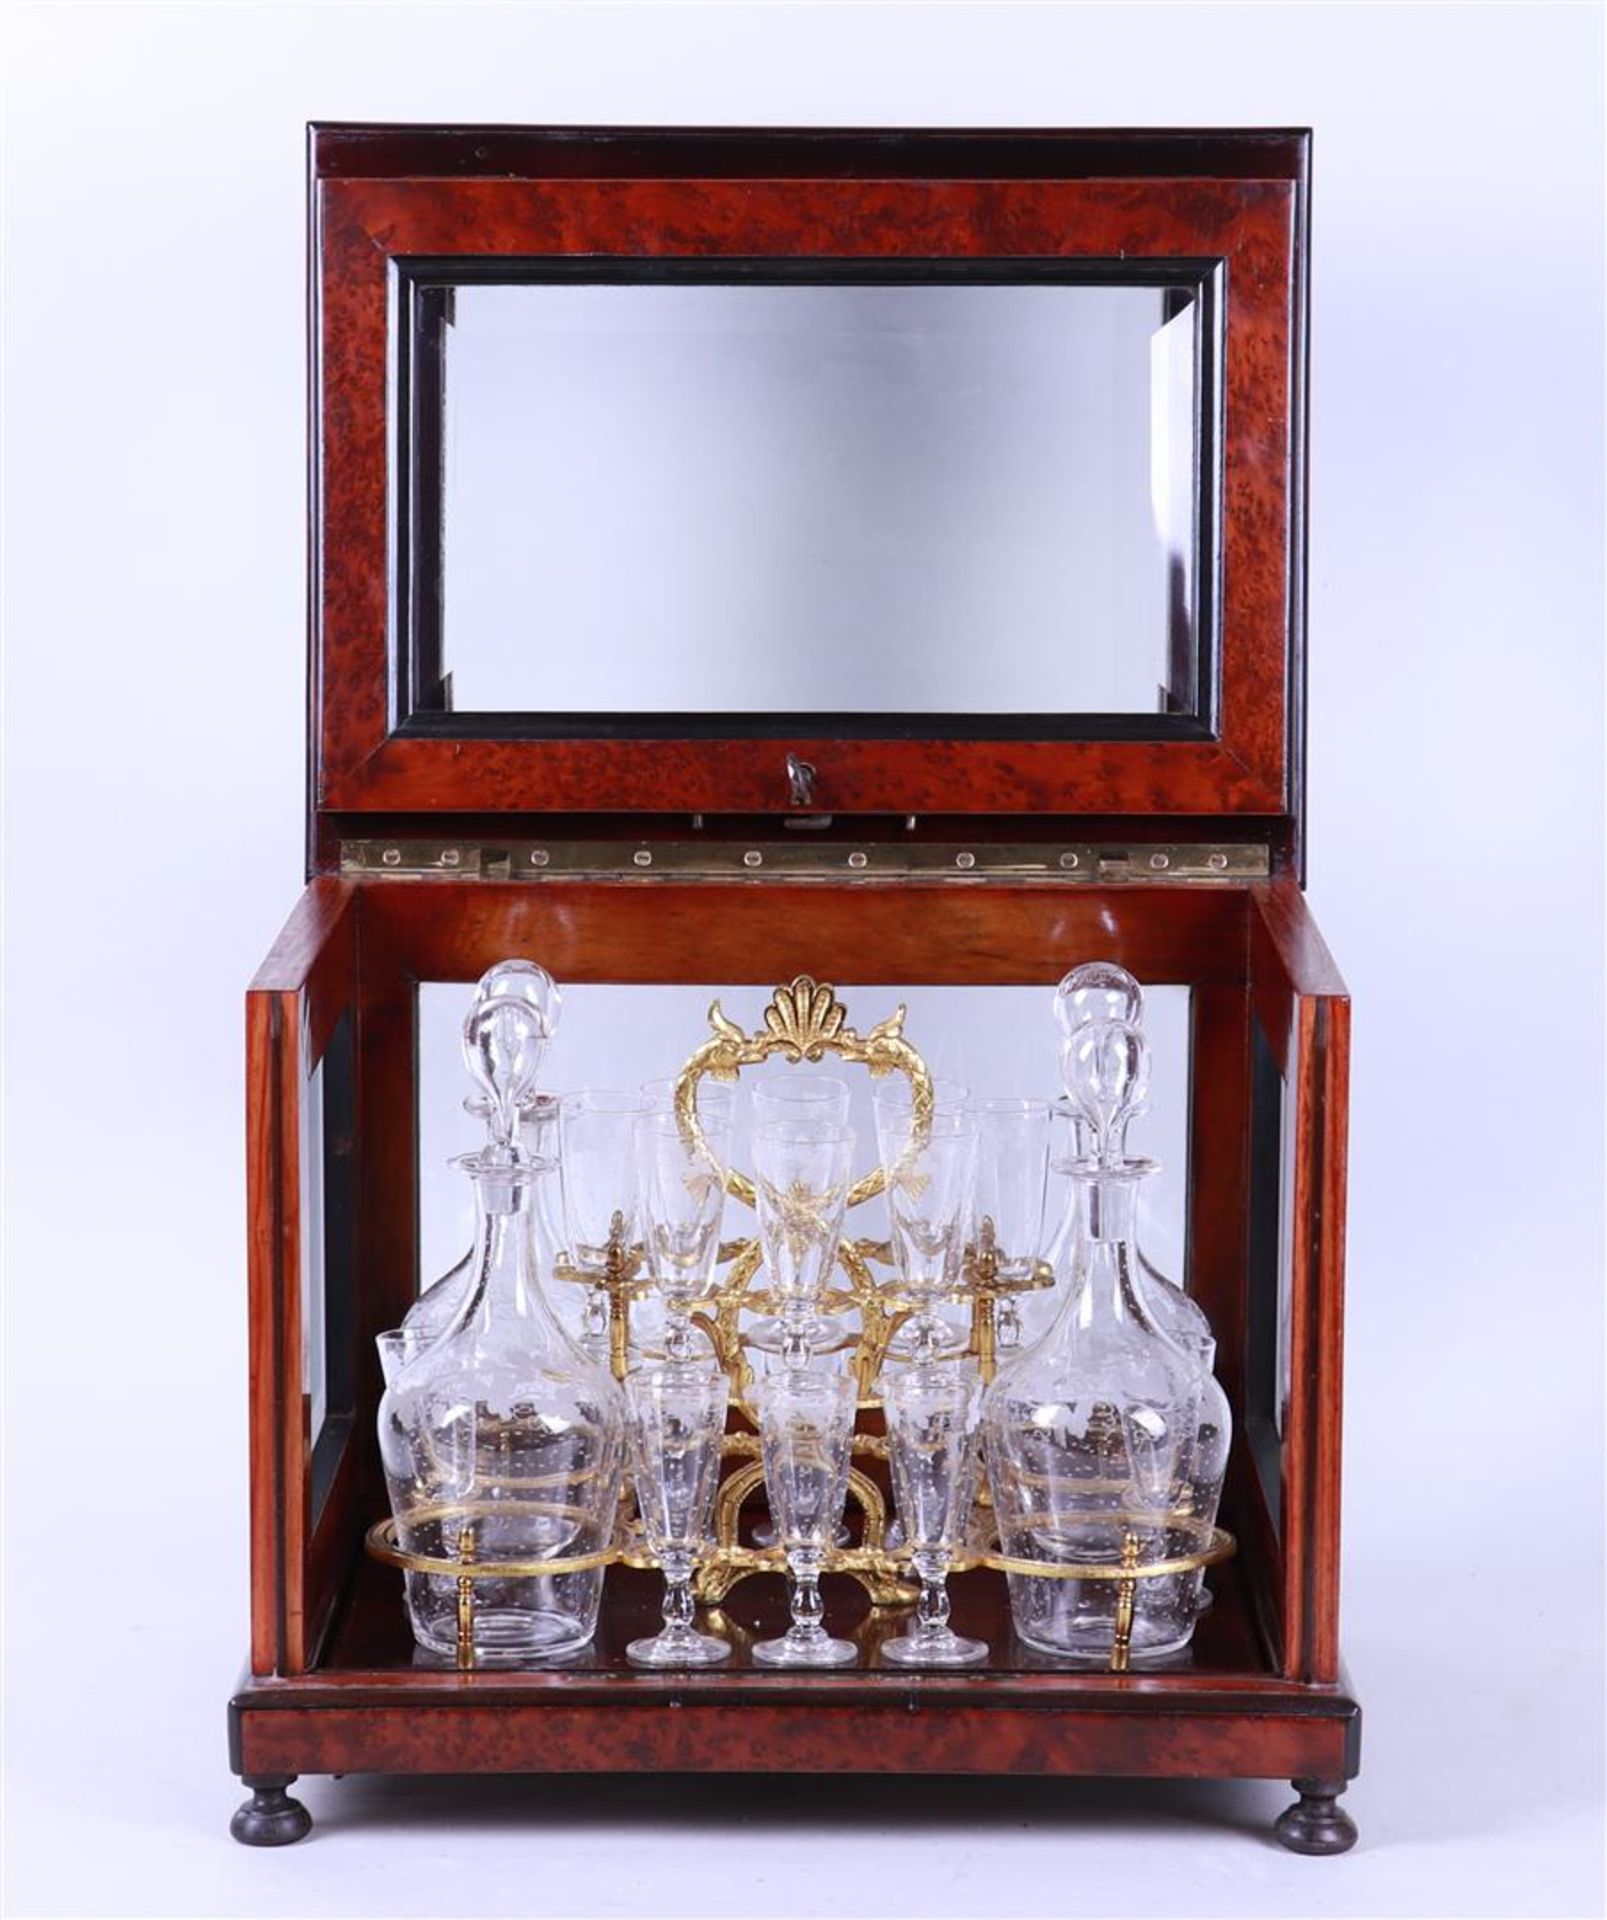 Walnut Veneered Liqueur Cellar with Faceted Cut Glass - Image 2 of 3